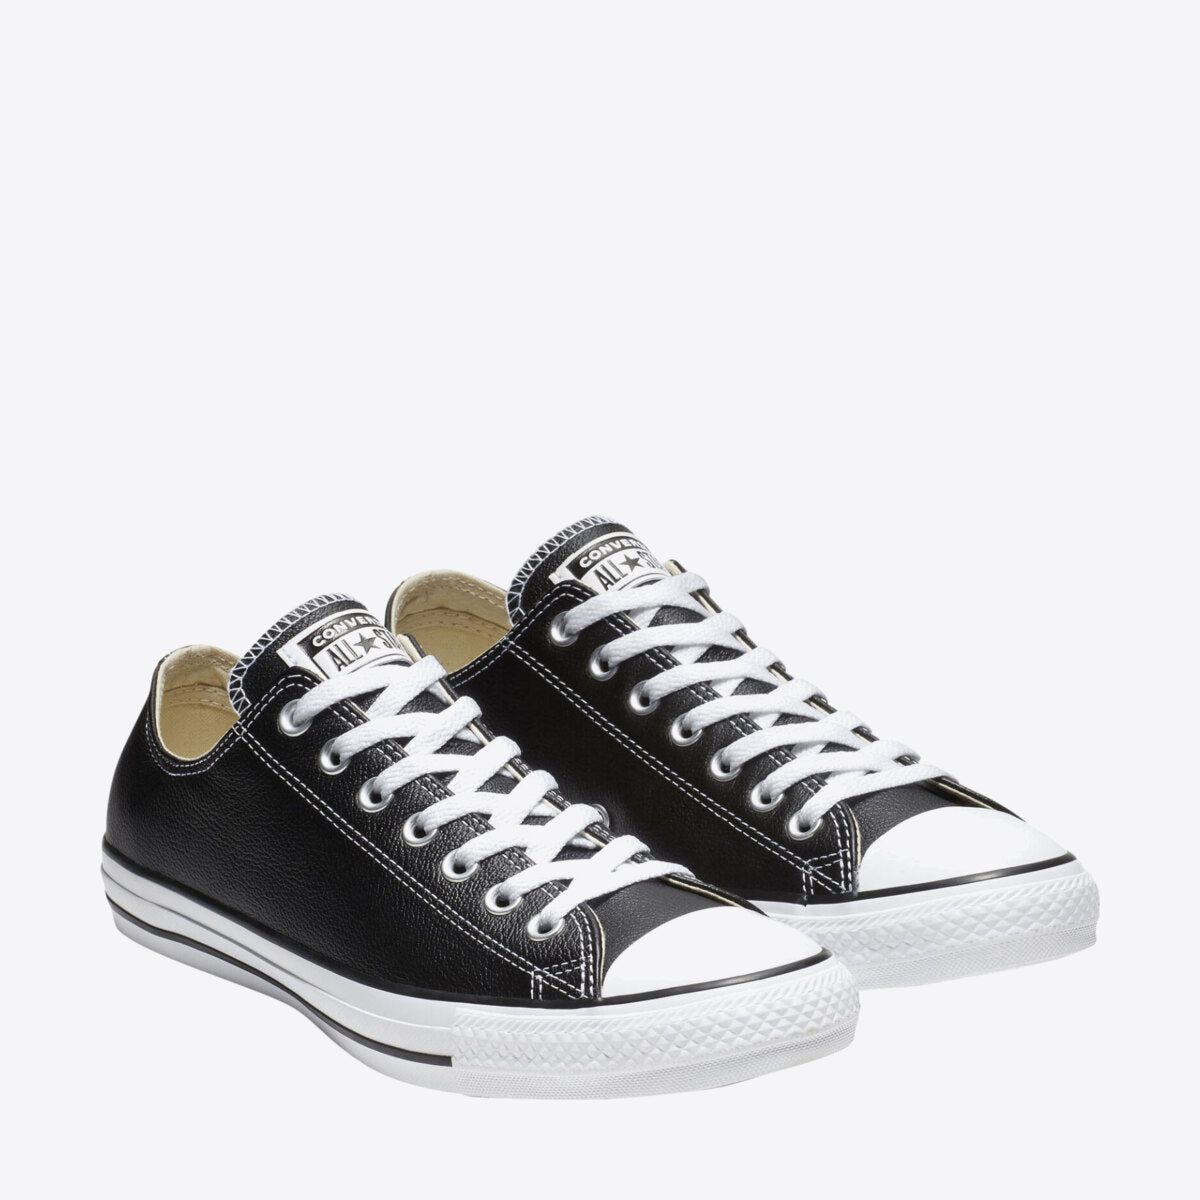 CONVERSE Chuck Taylor All Star Leather Low Black - Image 3